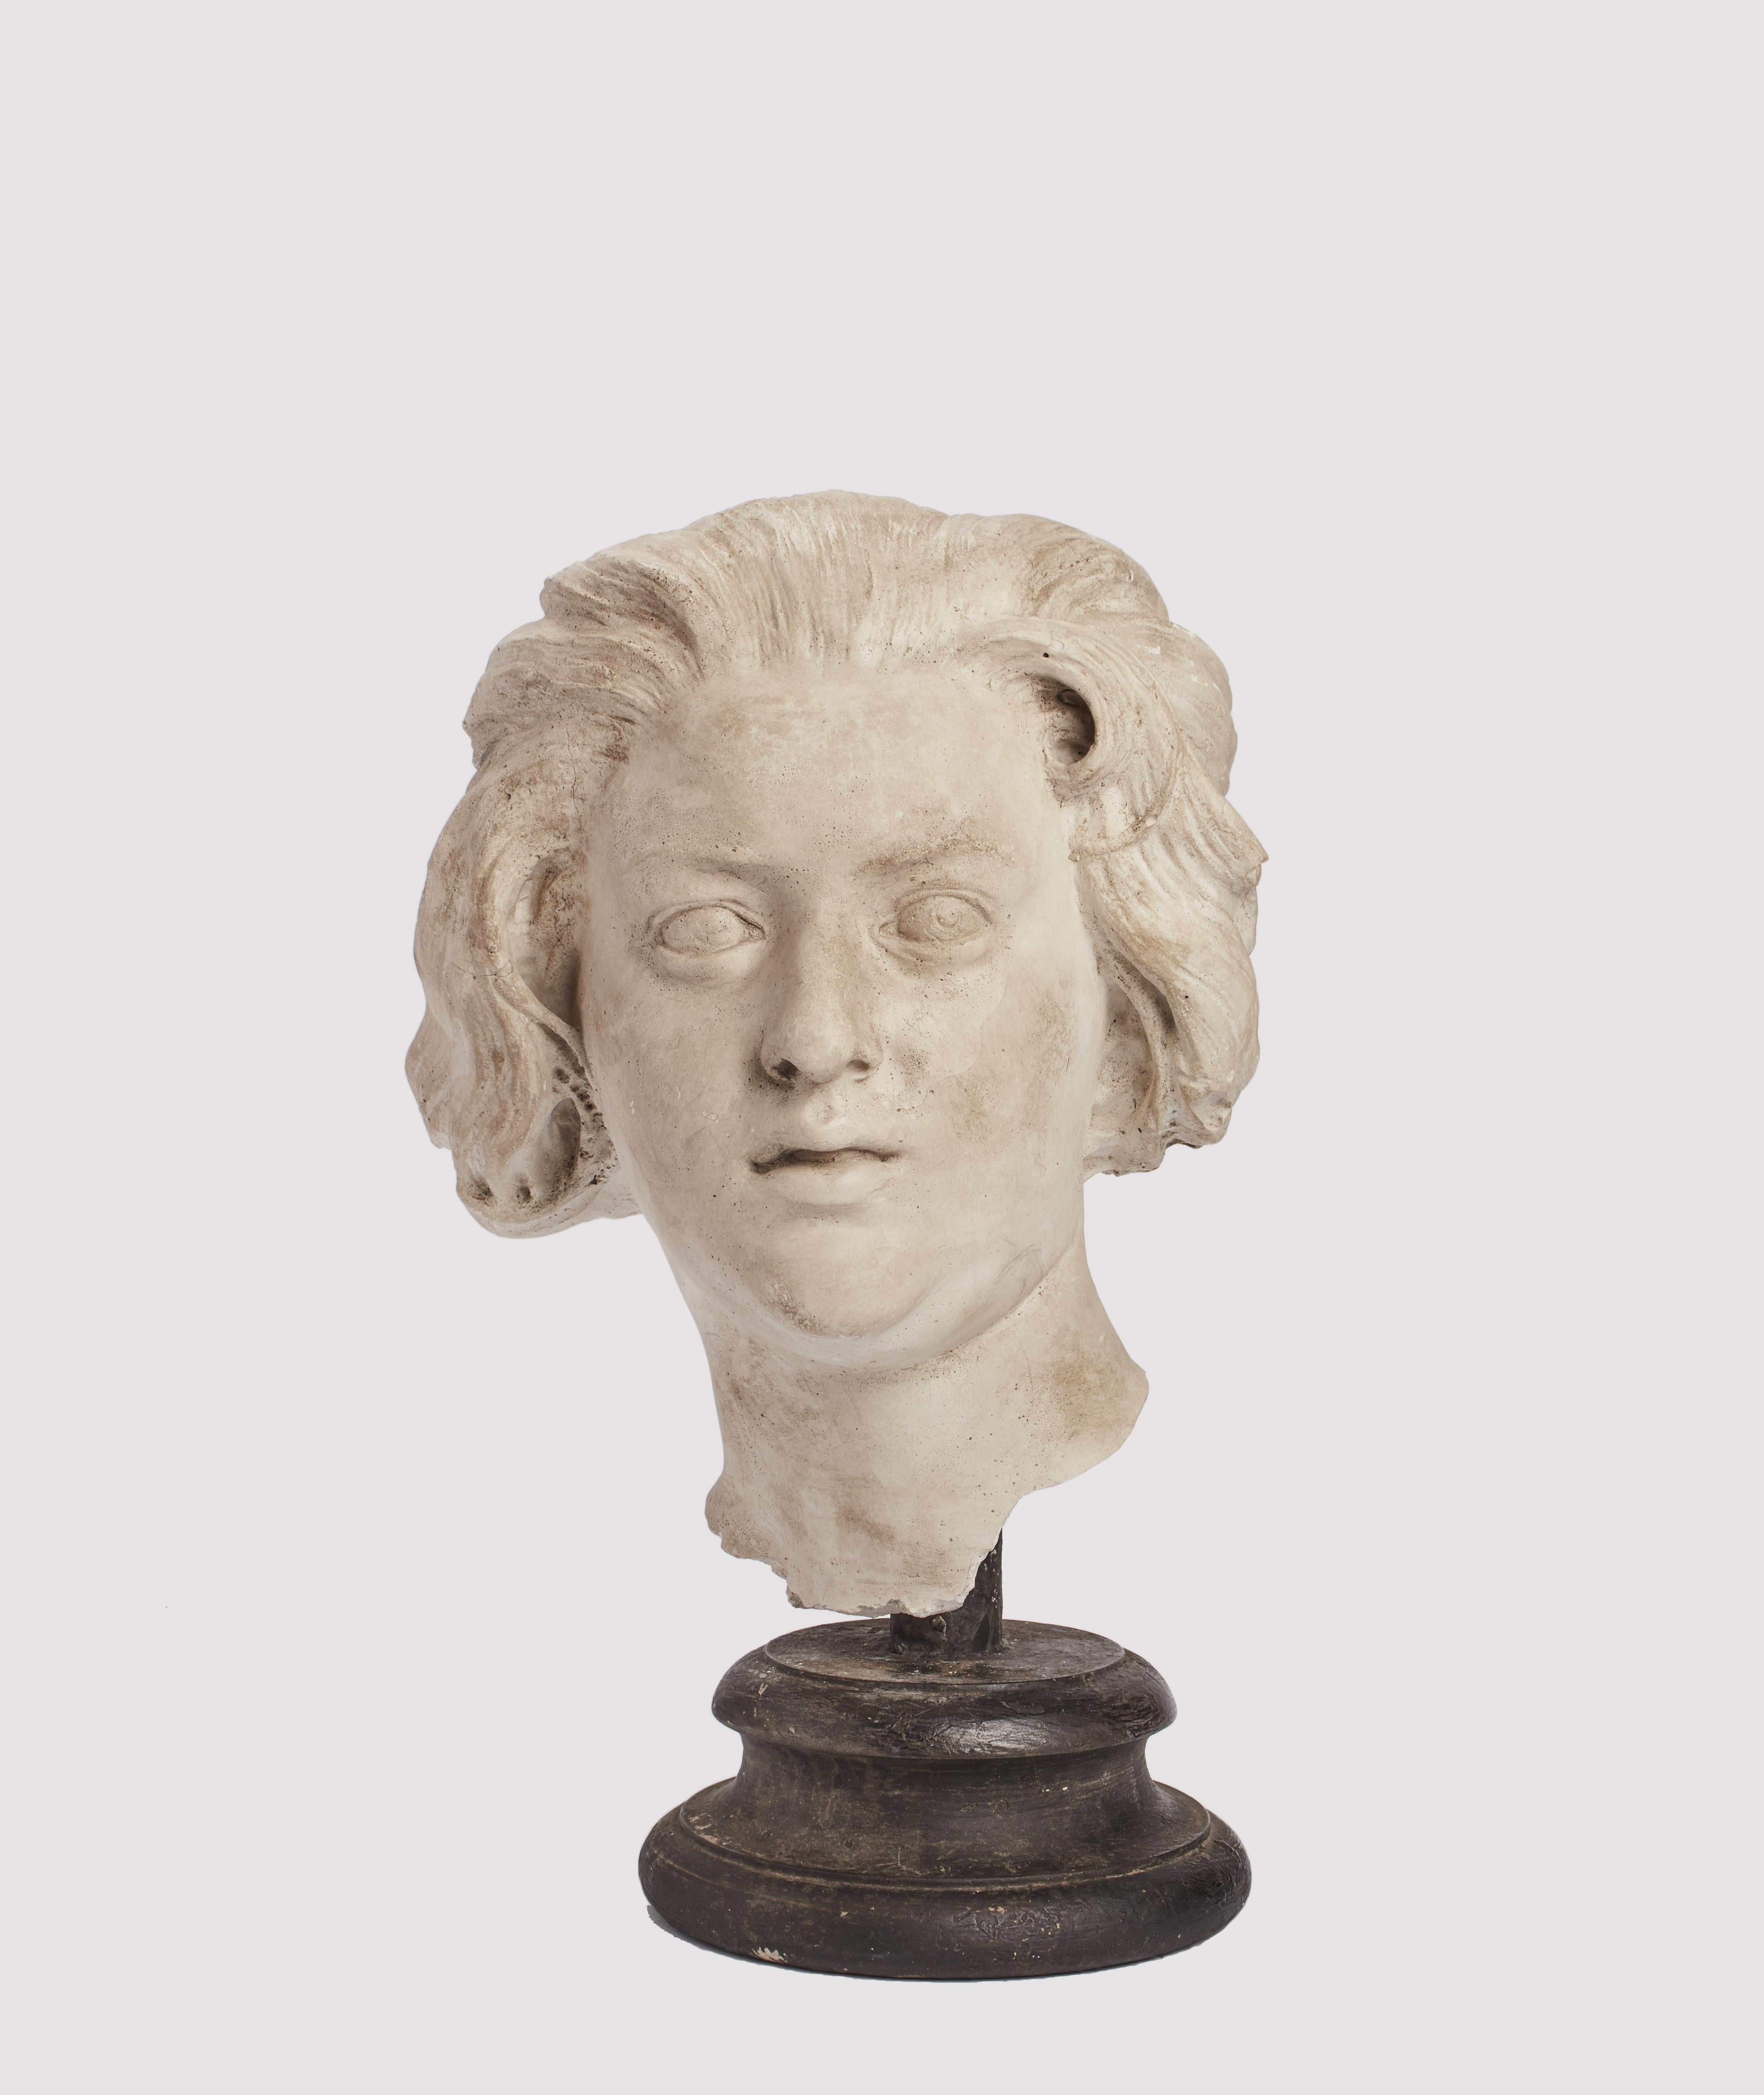 An academic cast. Over the fruit wooden black painted base is set the cast of Costanza Bonarelli head by Bernini. Cast for drawing teaching in Academy. Italy circa 1890. 